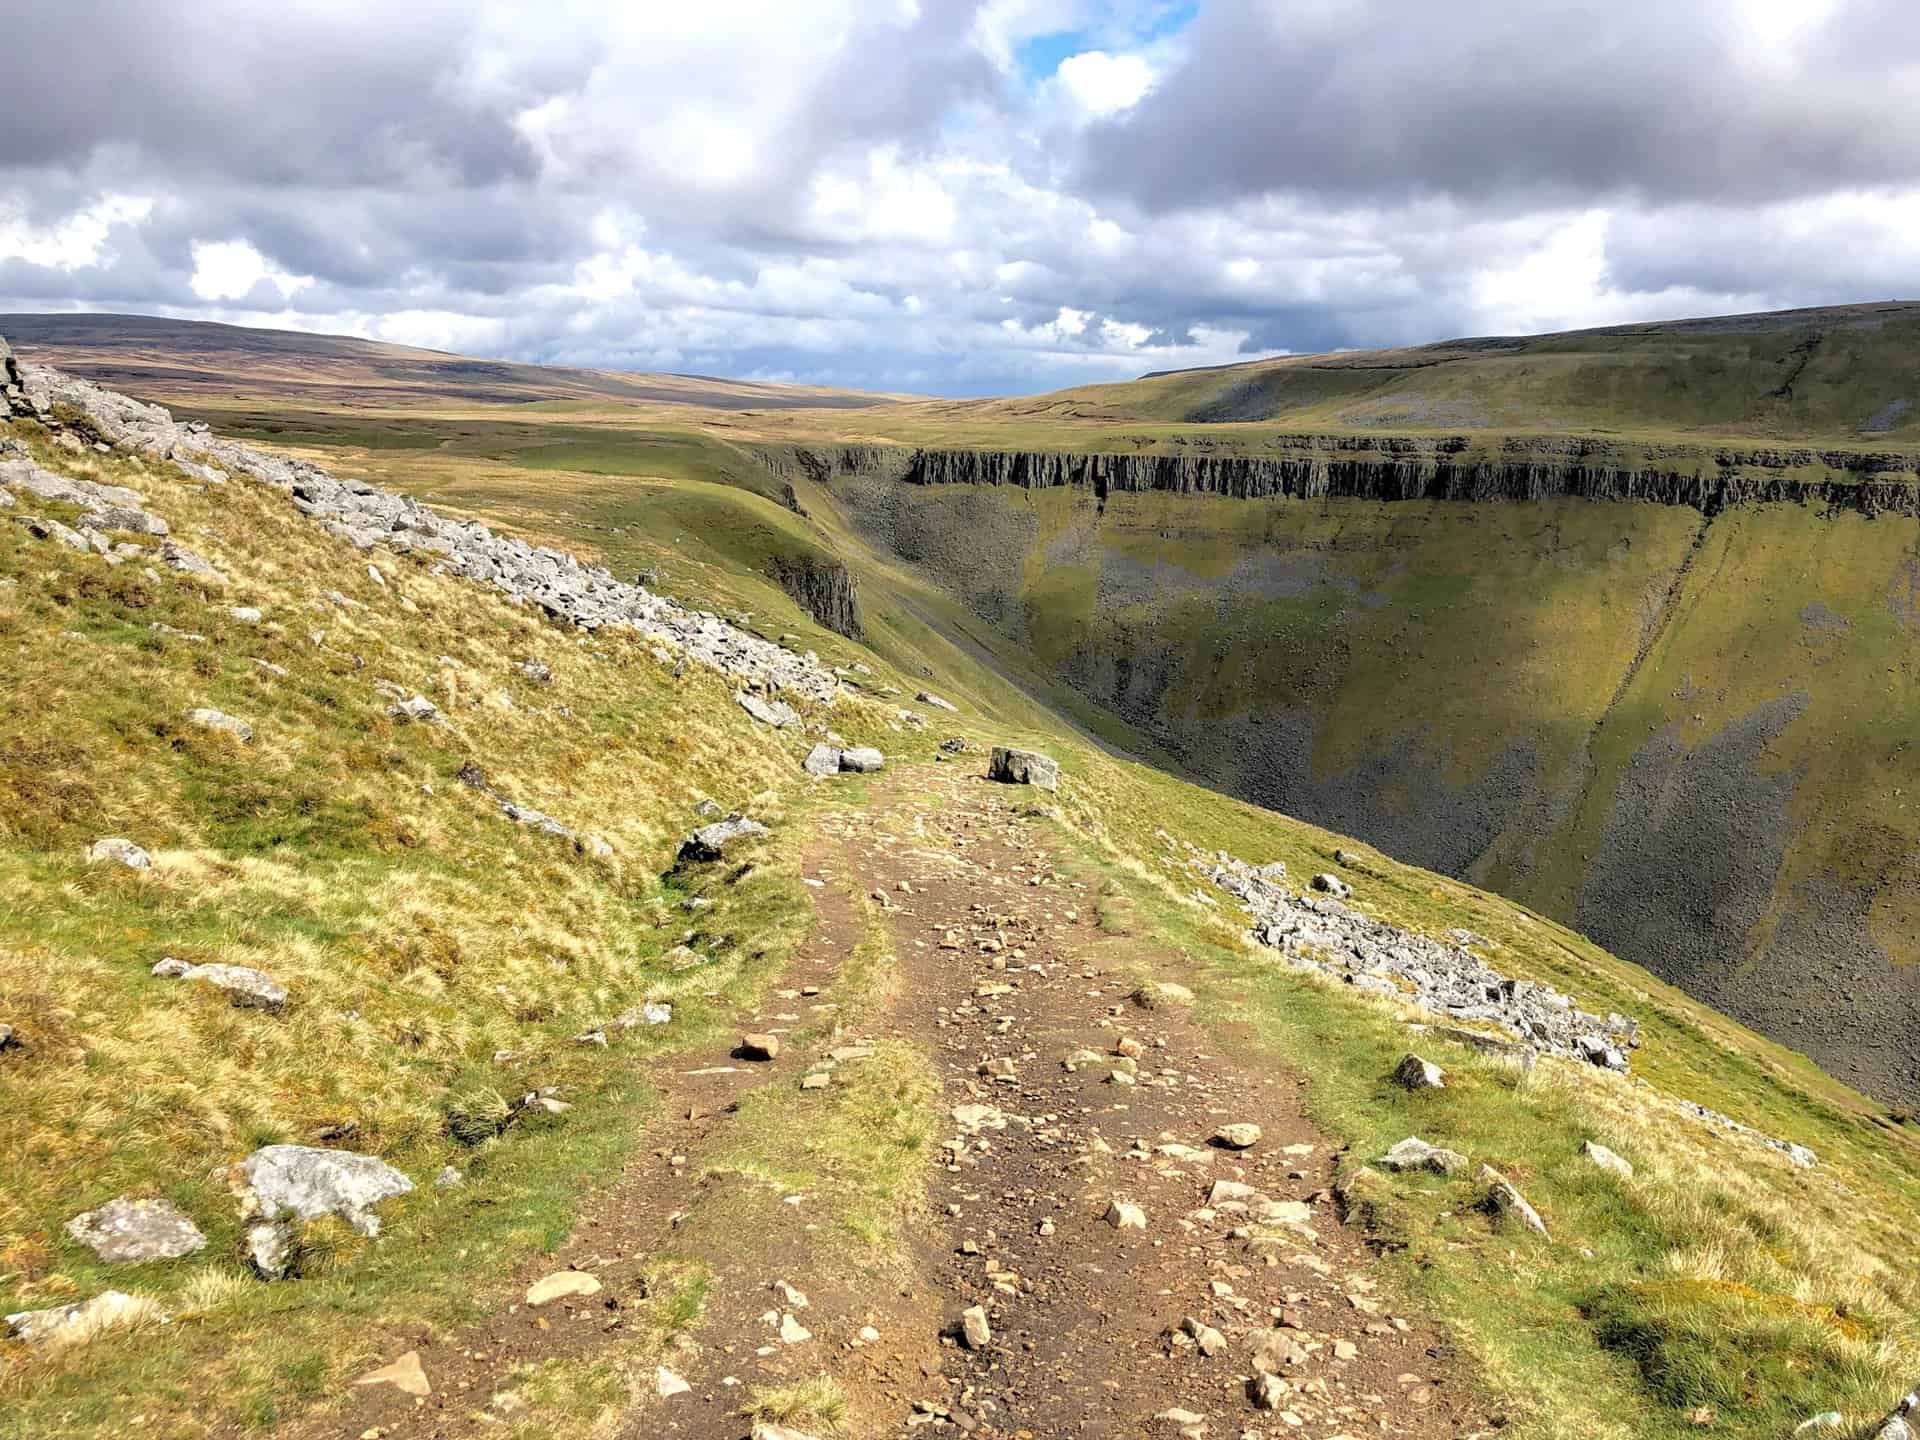 High Cup Nick, at the valley's head, becomes visible from the Pennine Way; the prominent rocky feature is High Cup Scar. Reaching this point is a rewarding moment, marking a significant achievement on the High Cup Nick walk.